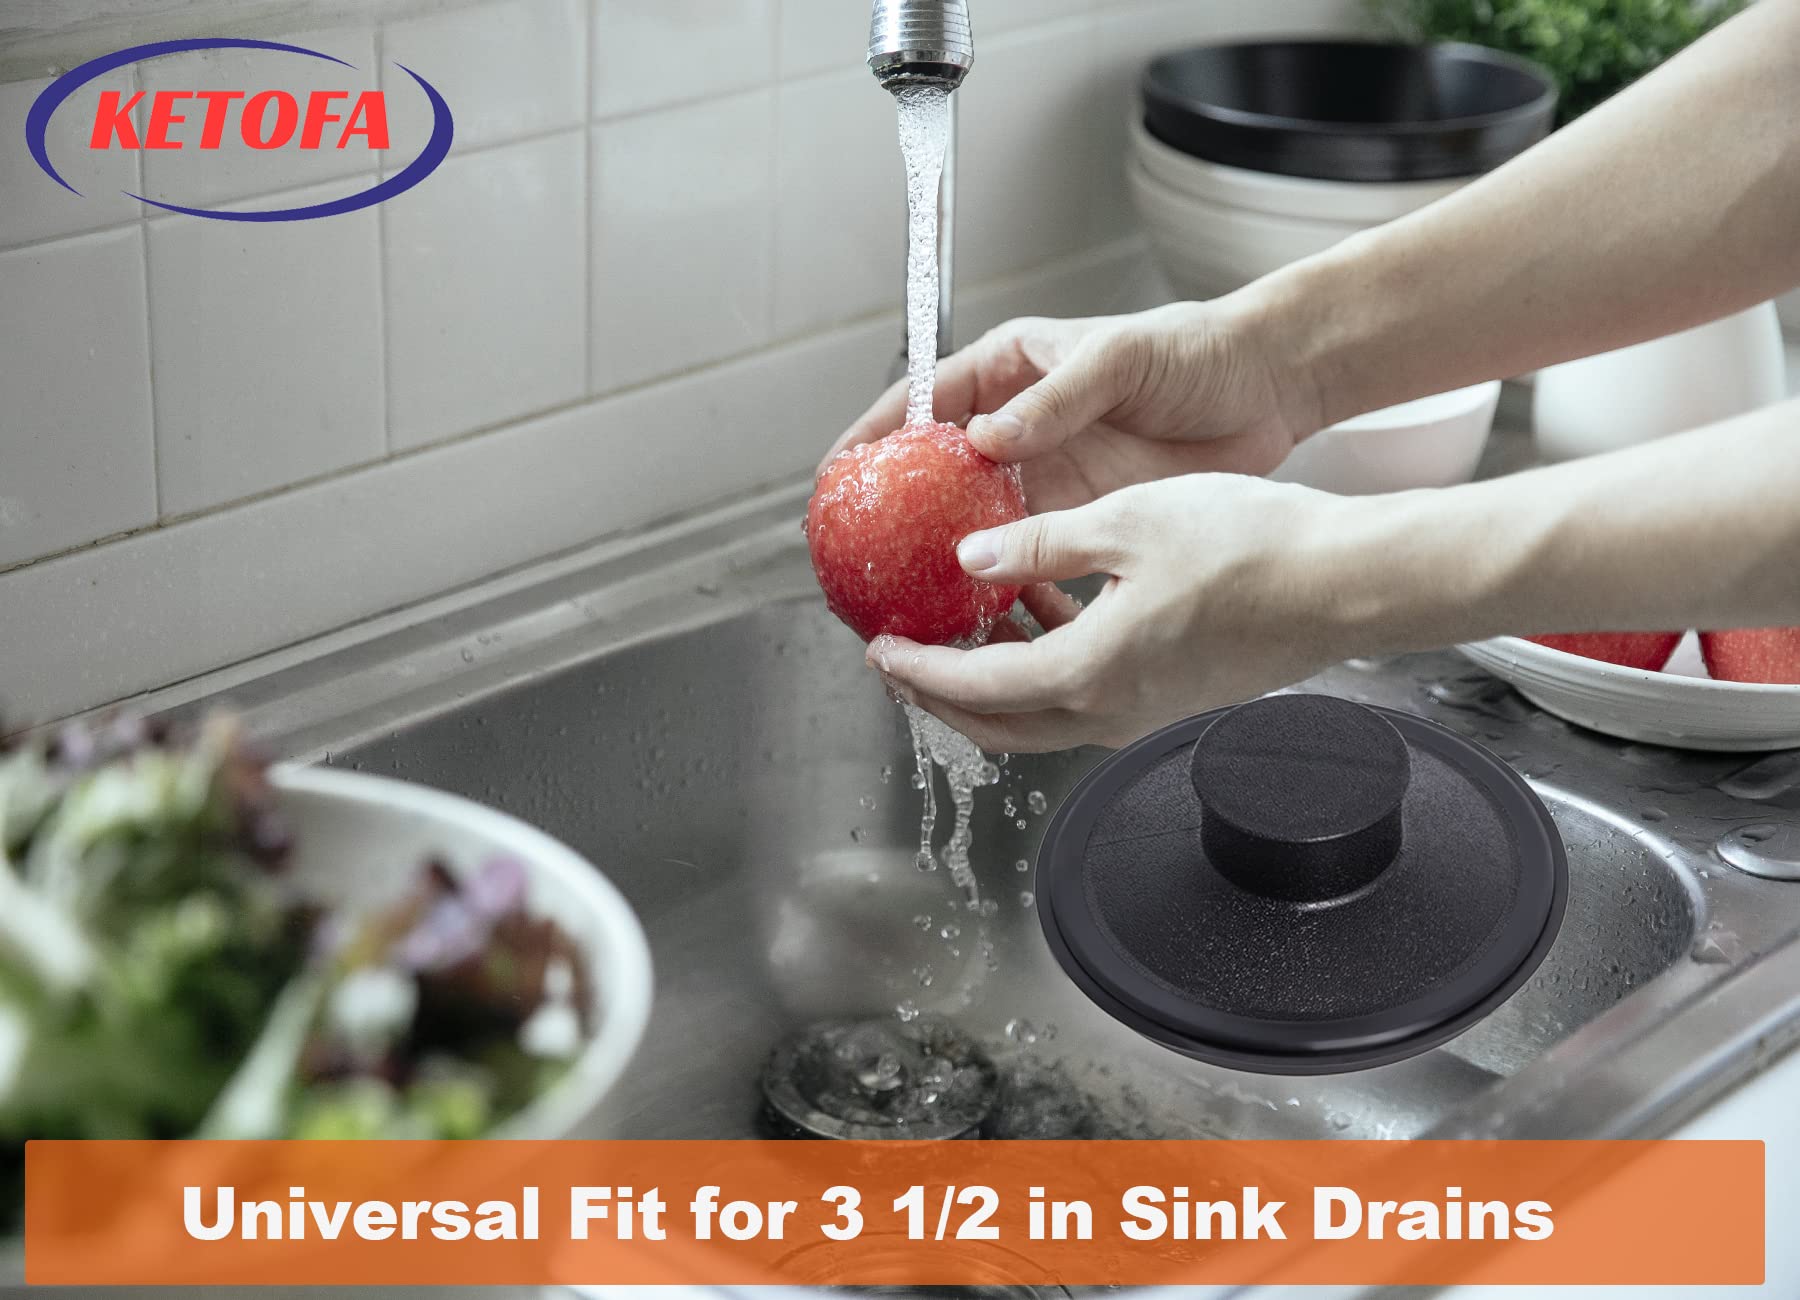 Sink Stopper for InSink-Erator STP-PL Garbage Disposal, Exact Replacement Stopper Drain Compatible with Standard 3-1/2" Drains, Sink Drain Stopper for Kohler, Waste King, Whirlpool